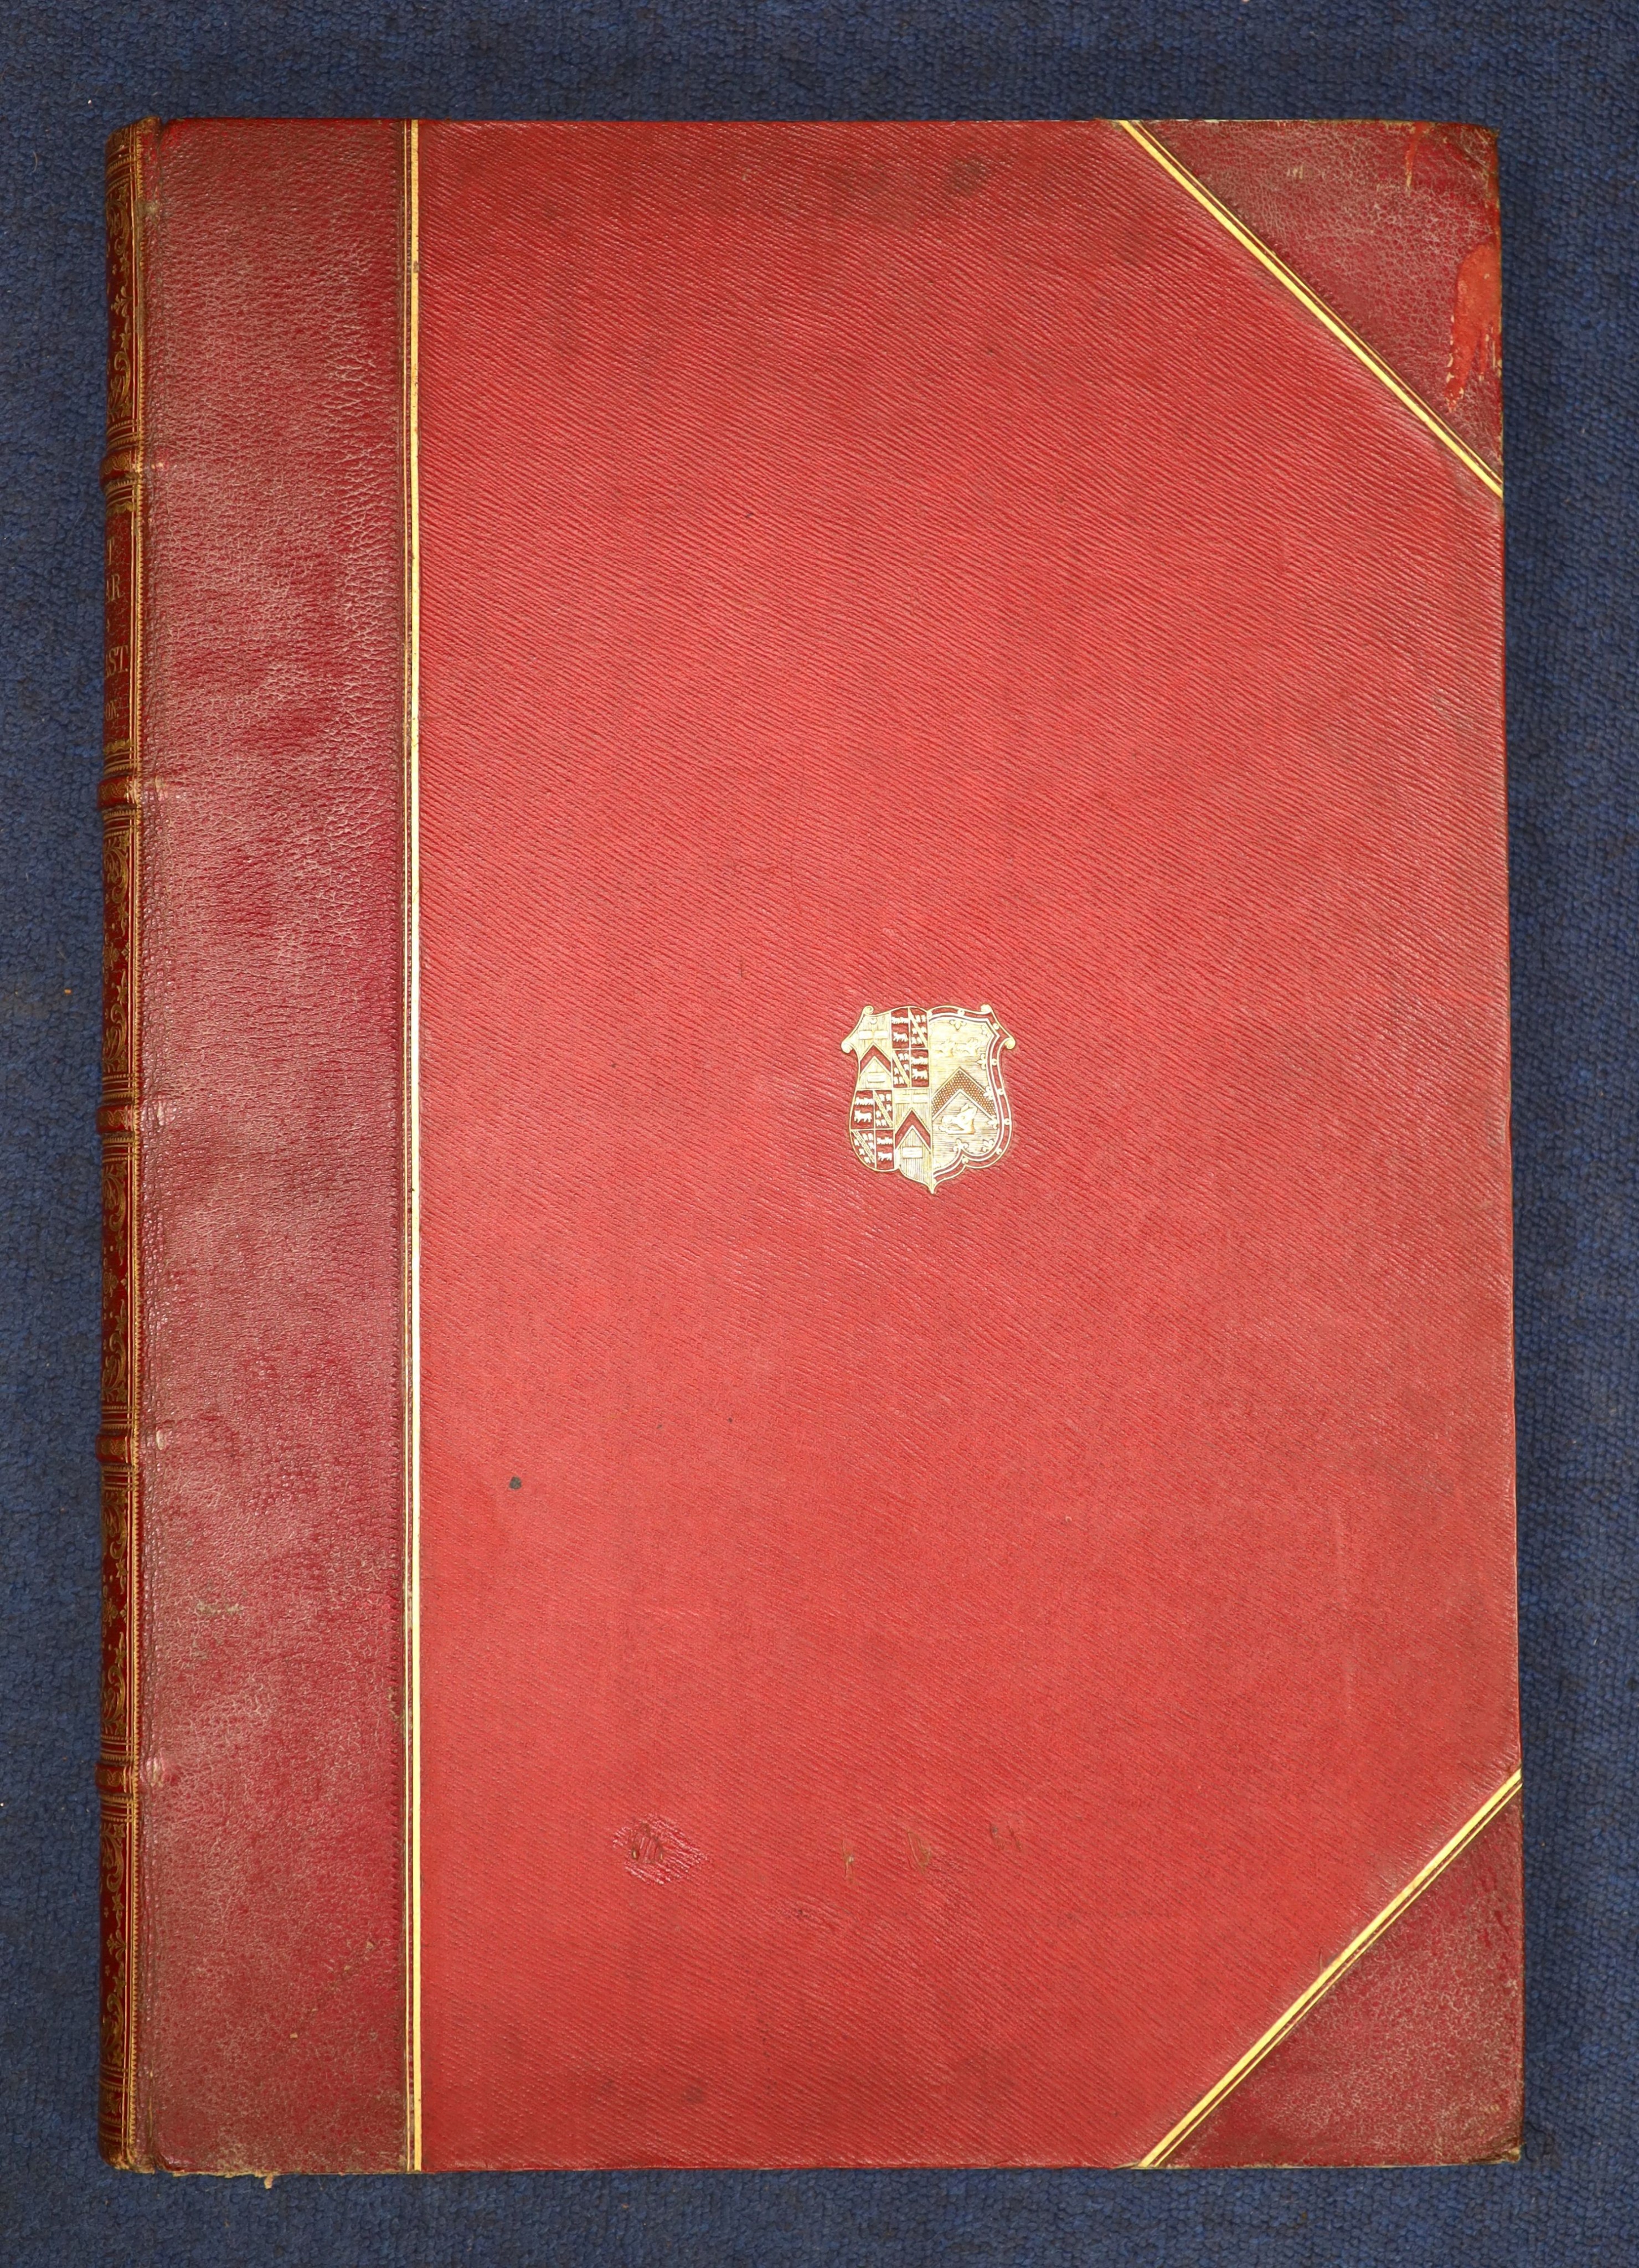 Simpson, William - The Seat of War in the East, 2 parts in 1 vol, folio, half red morocco, with - Image 2 of 6